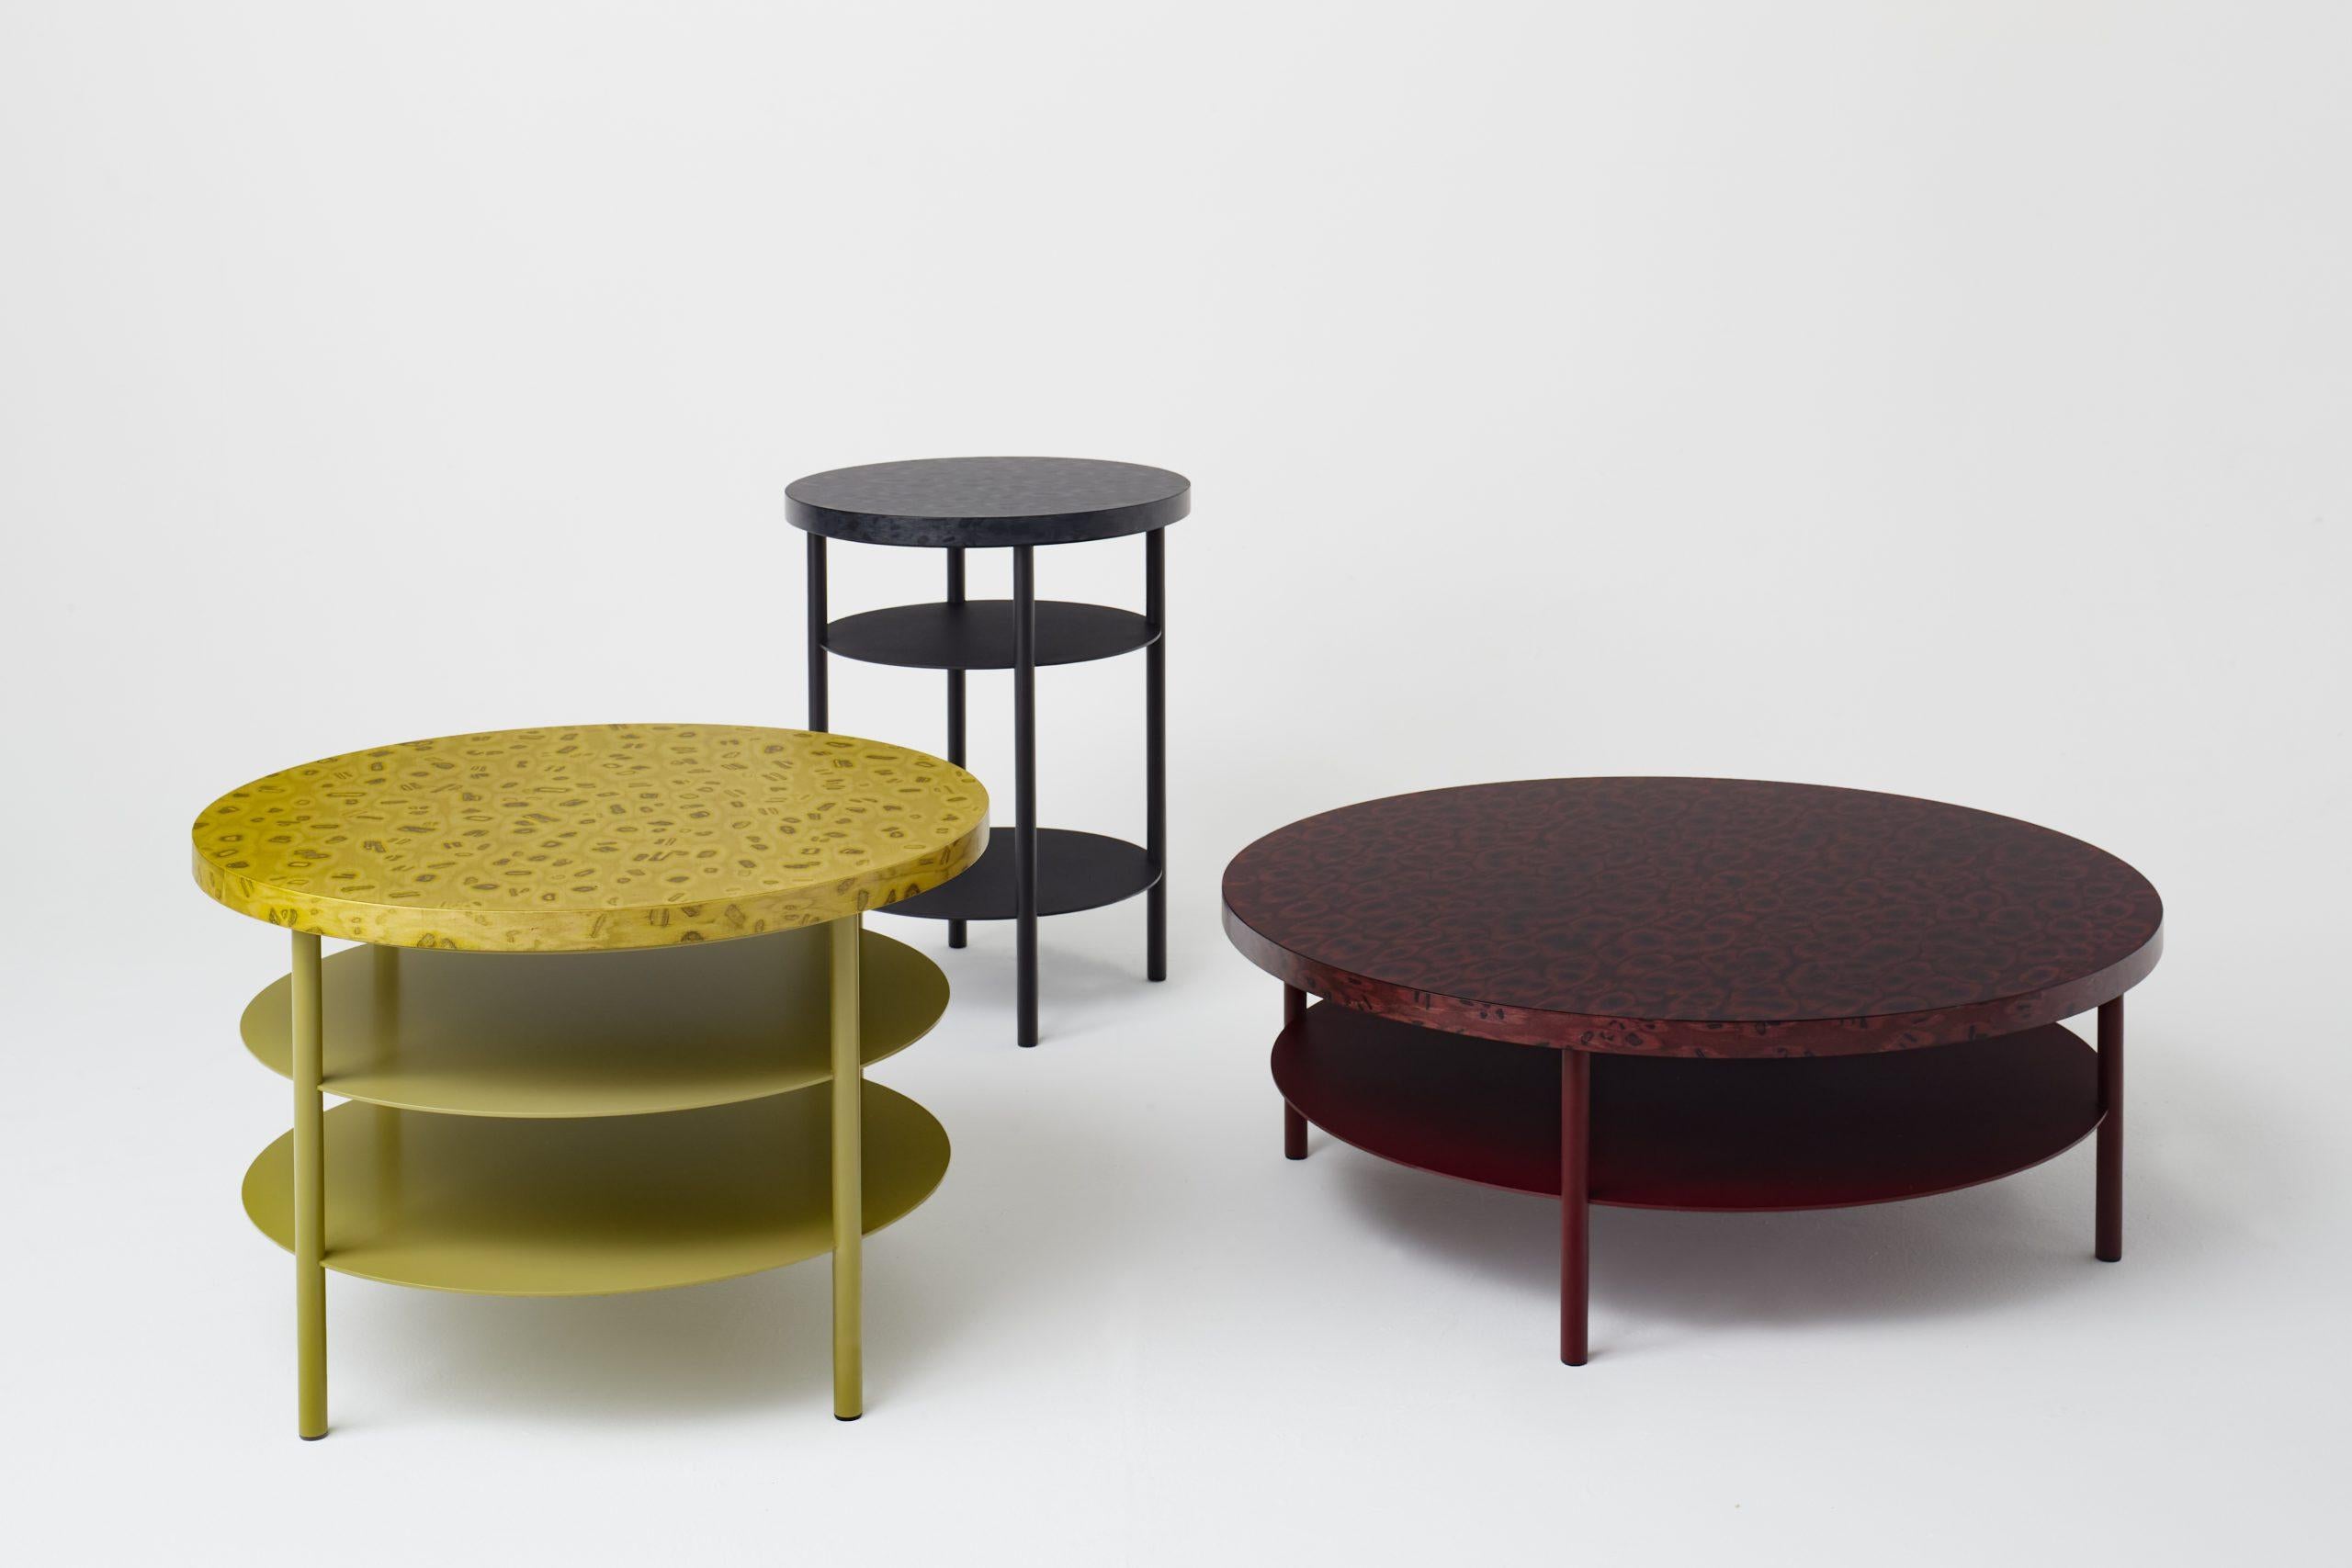 This new family of tables with round tops in OSIS with a veneer edge and matching frame colour, comes in three different sizes, high, midi and low, so there is a suitable table height for every living arrangement. Open compartments under the